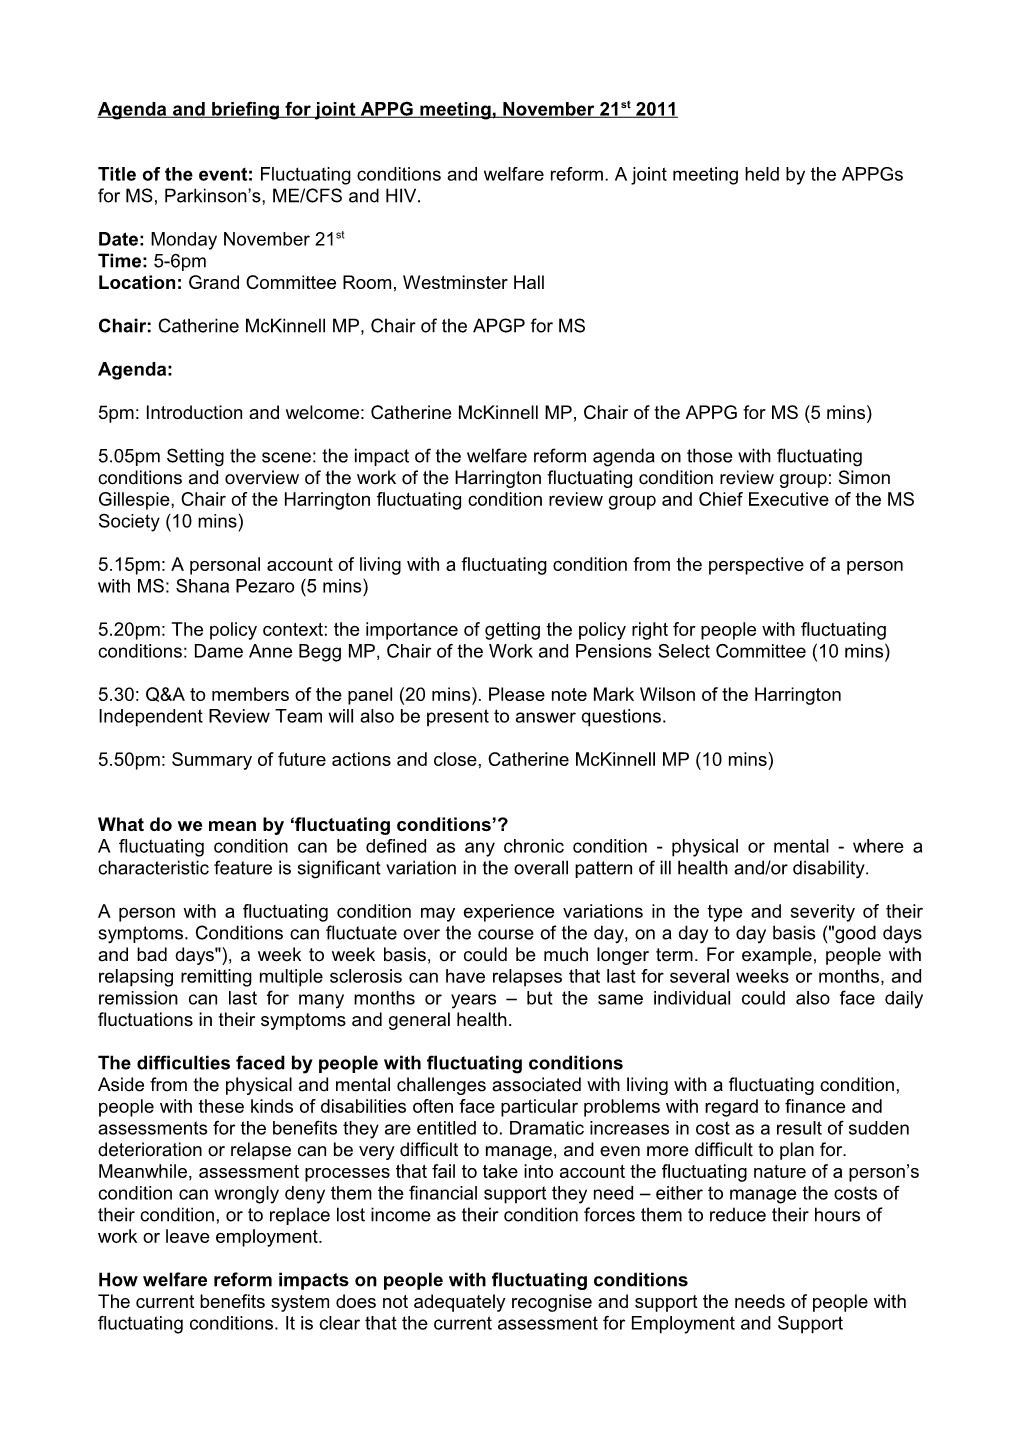 Briefing Notes for the Joint APPG on Fluctuating Conditions 21St November 2011